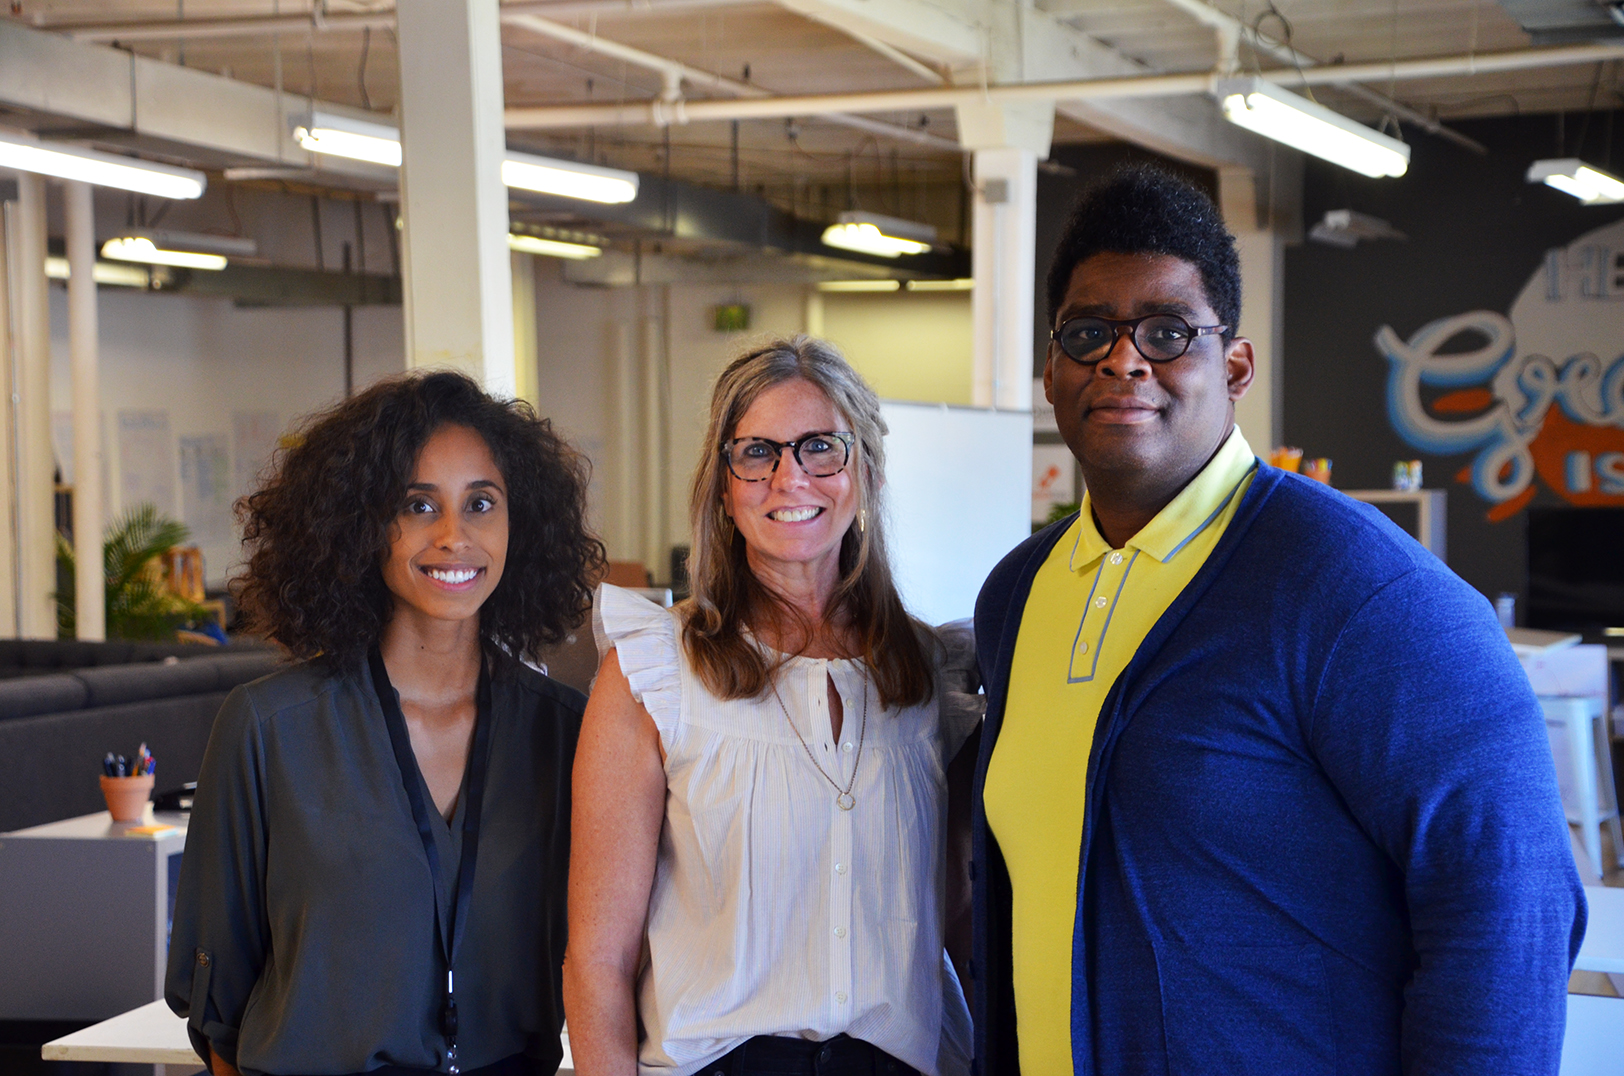 Peek inside: Project Commons teen accelerator pilot aims for ‘innovation, collaboration, impact’